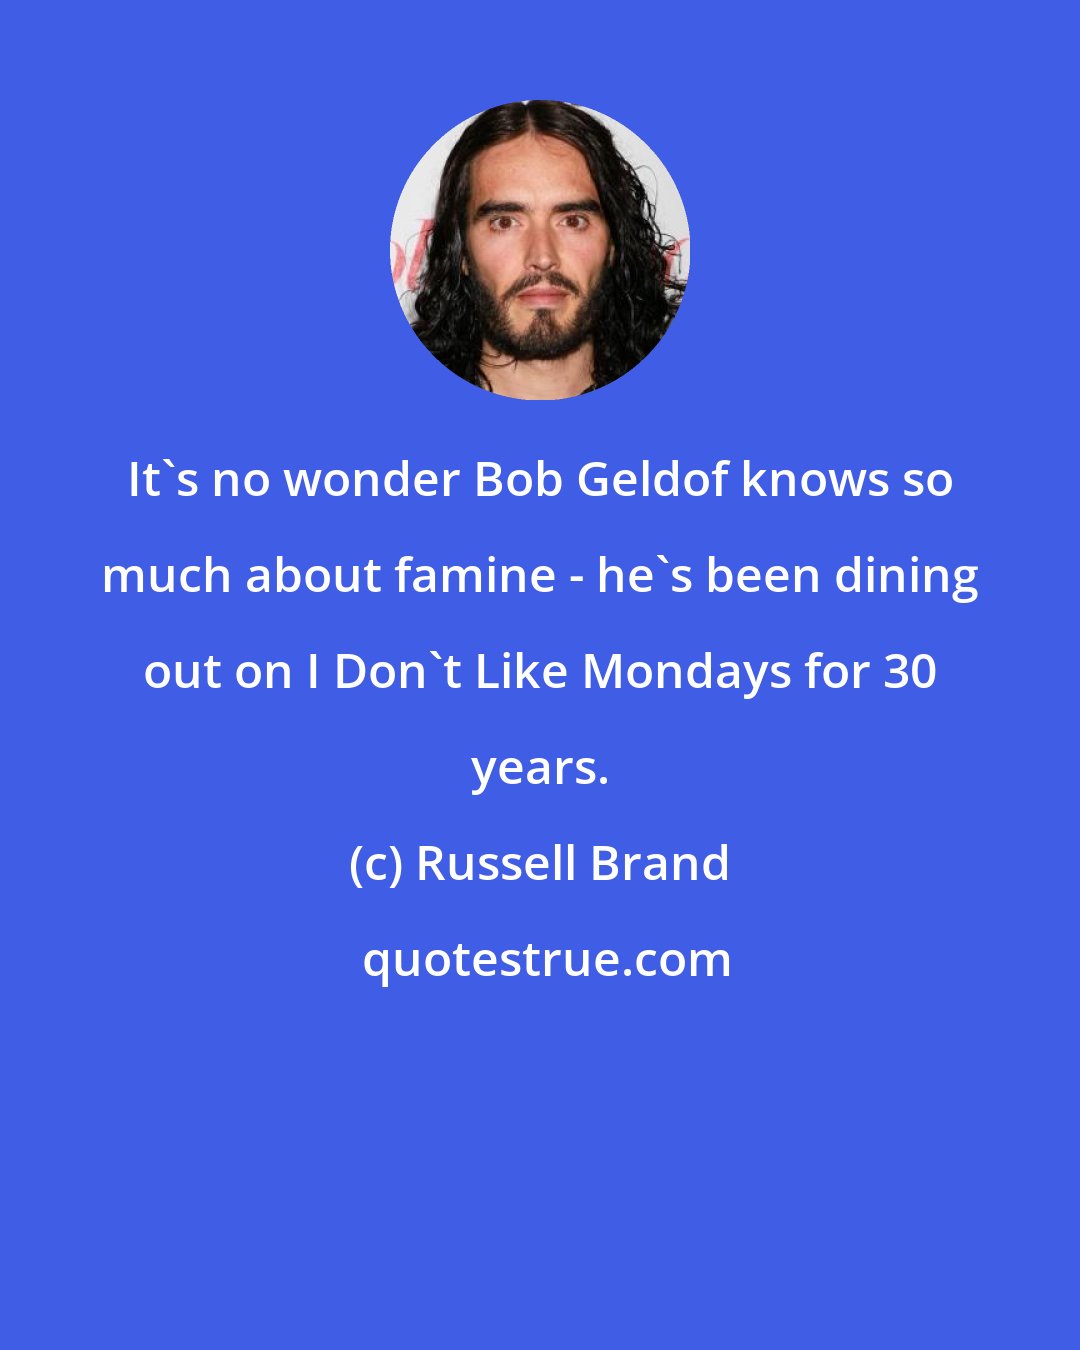 Russell Brand: It's no wonder Bob Geldof knows so much about famine - he's been dining out on I Don't Like Mondays for 30 years.